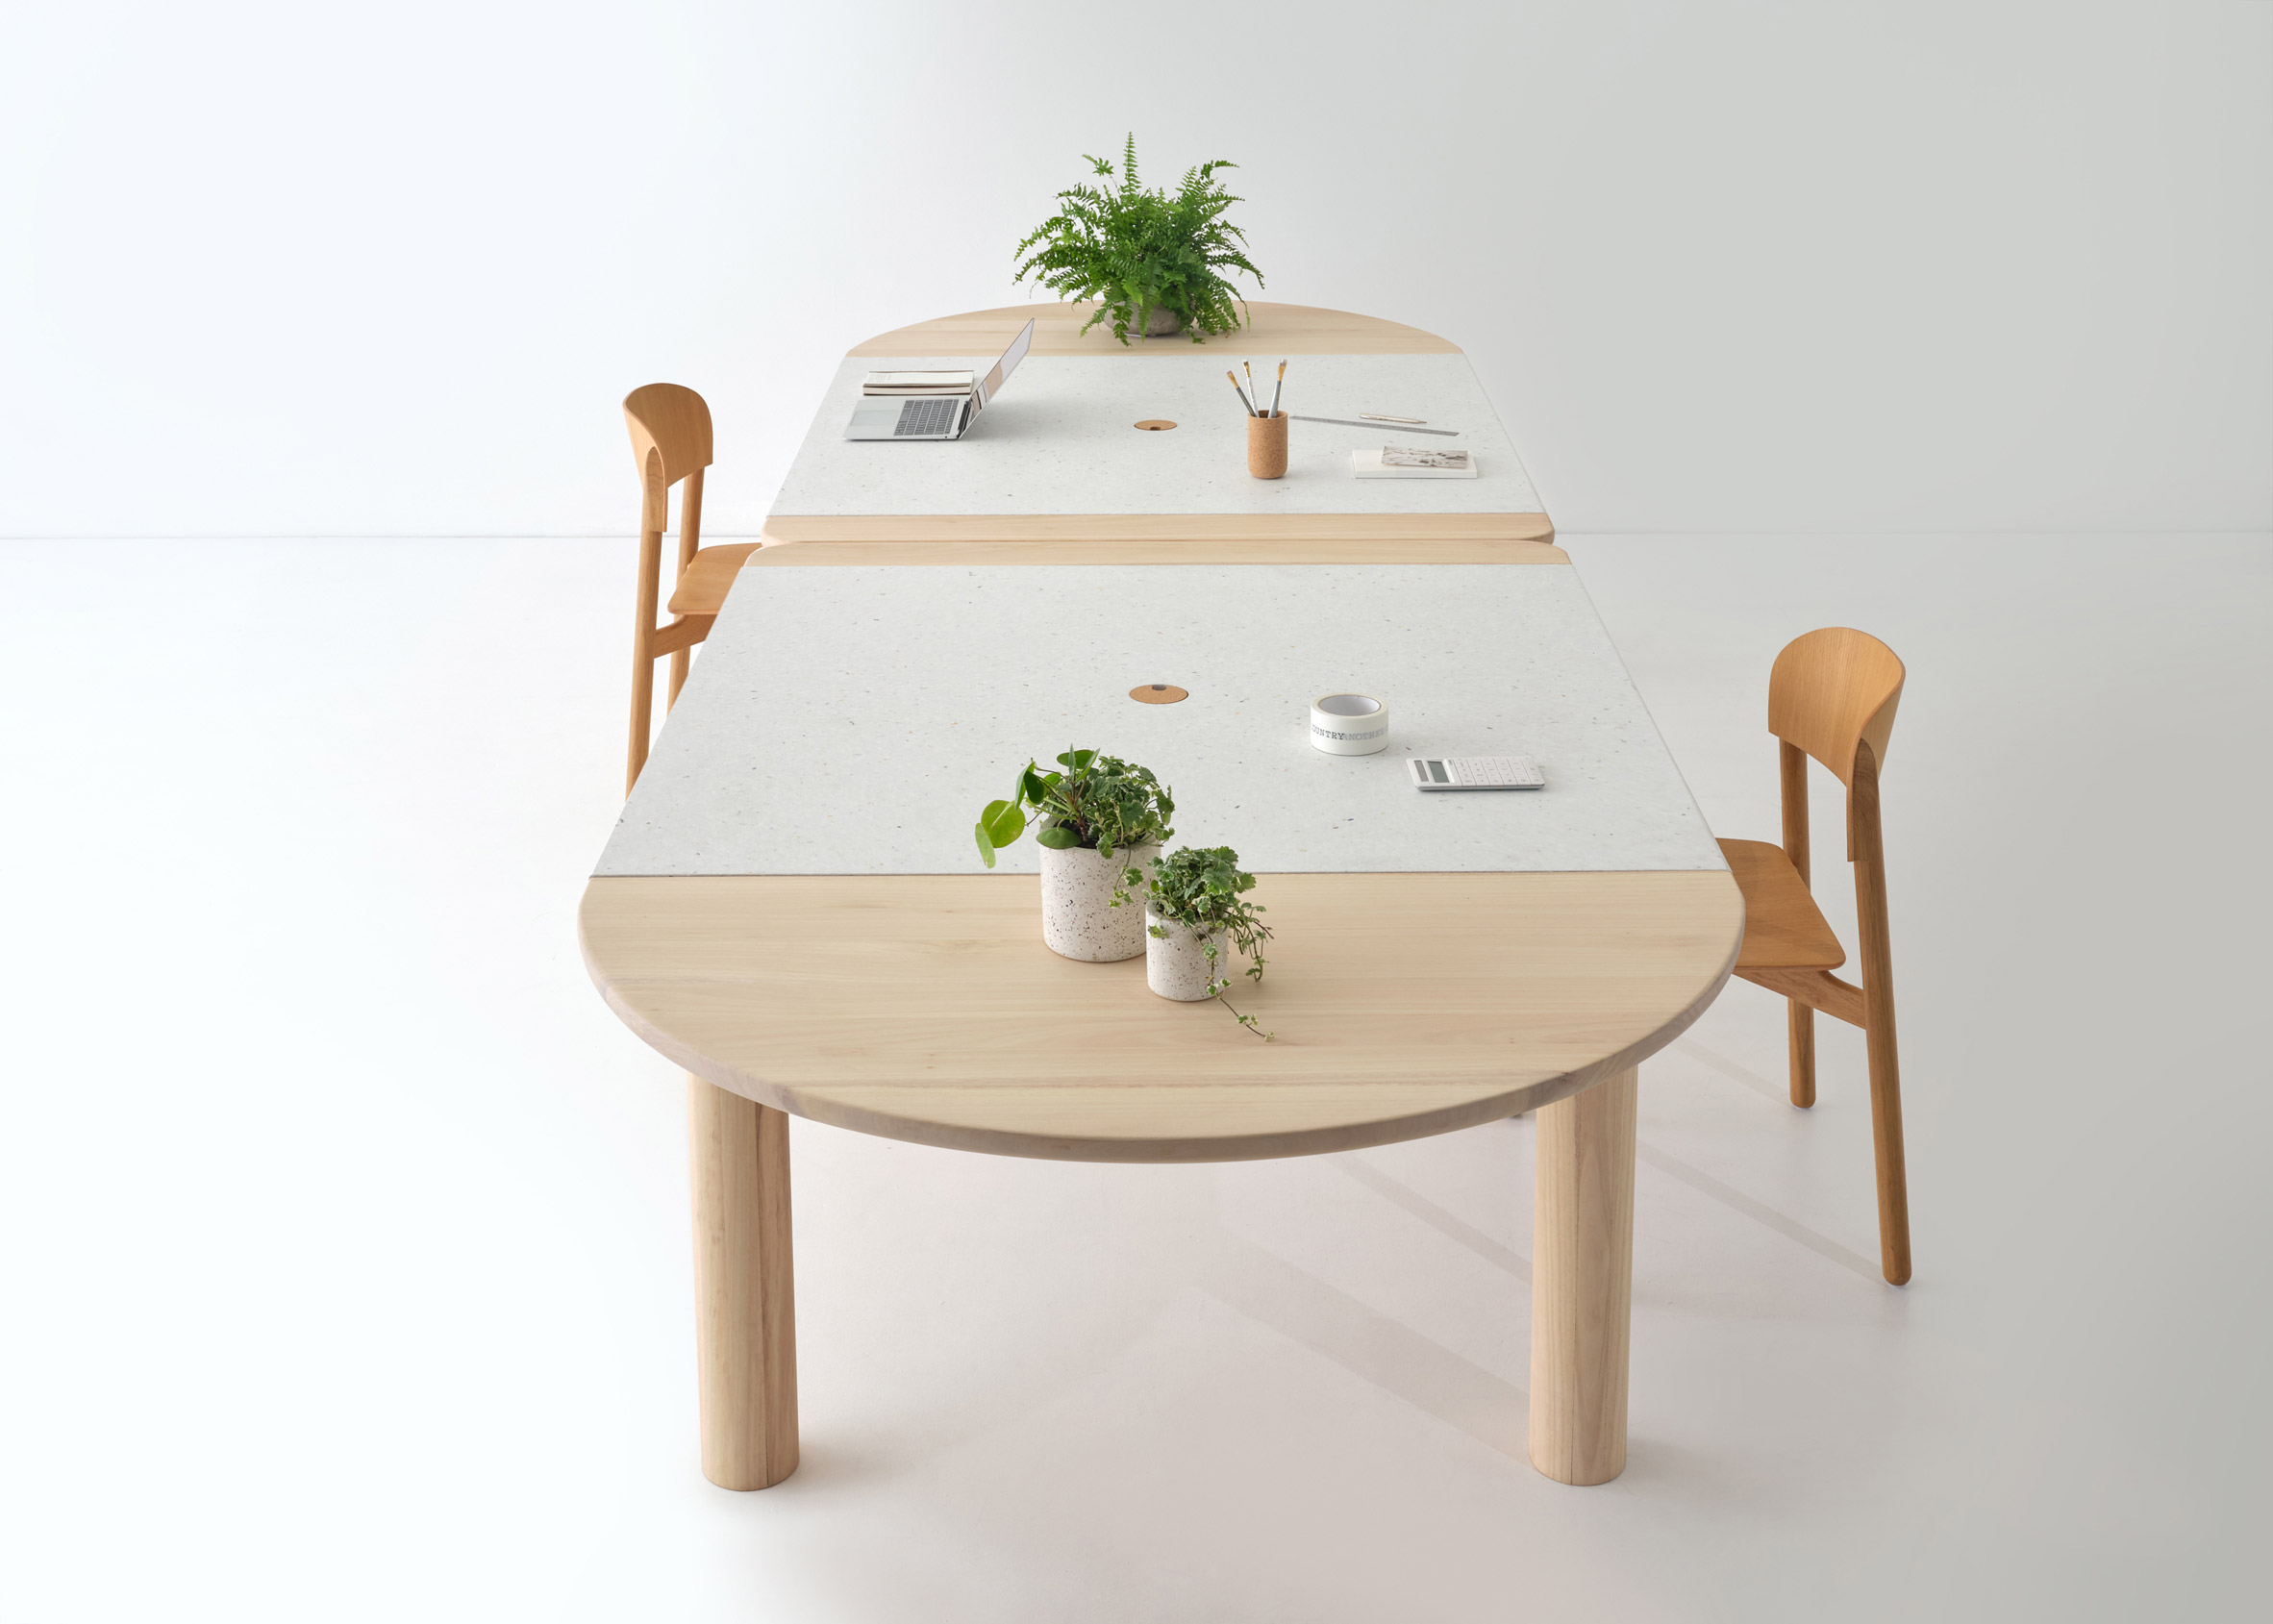 Wood and recycled plastic office table with plants on top